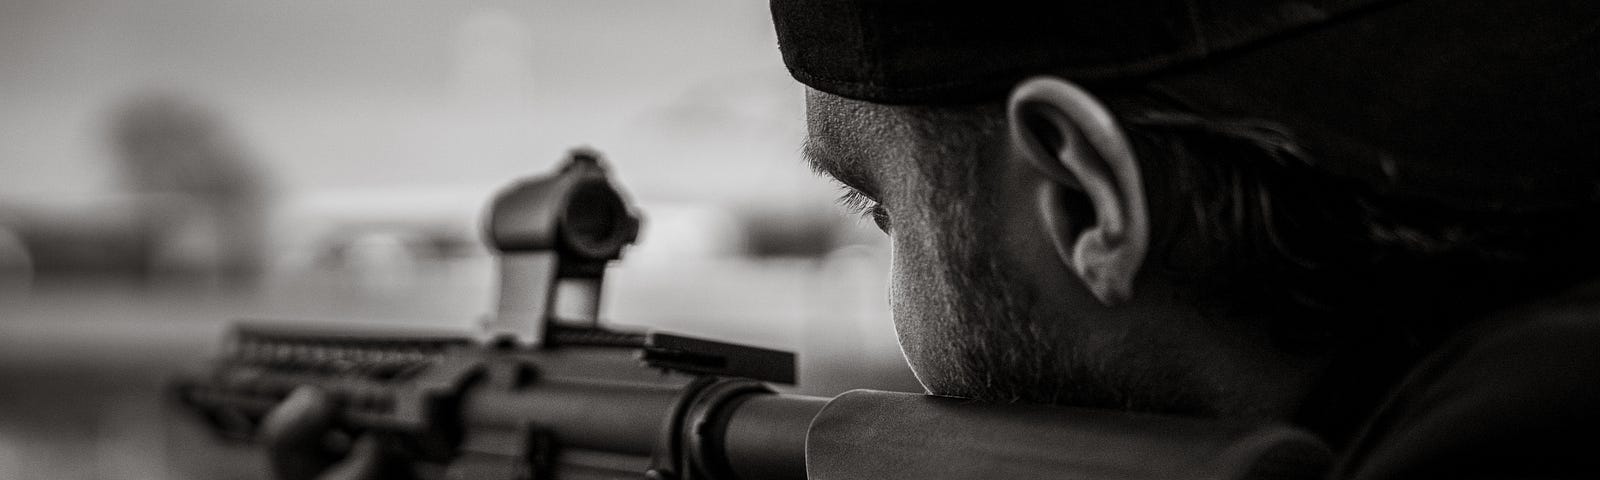 Black and white photo of man pointing an assault rifle.